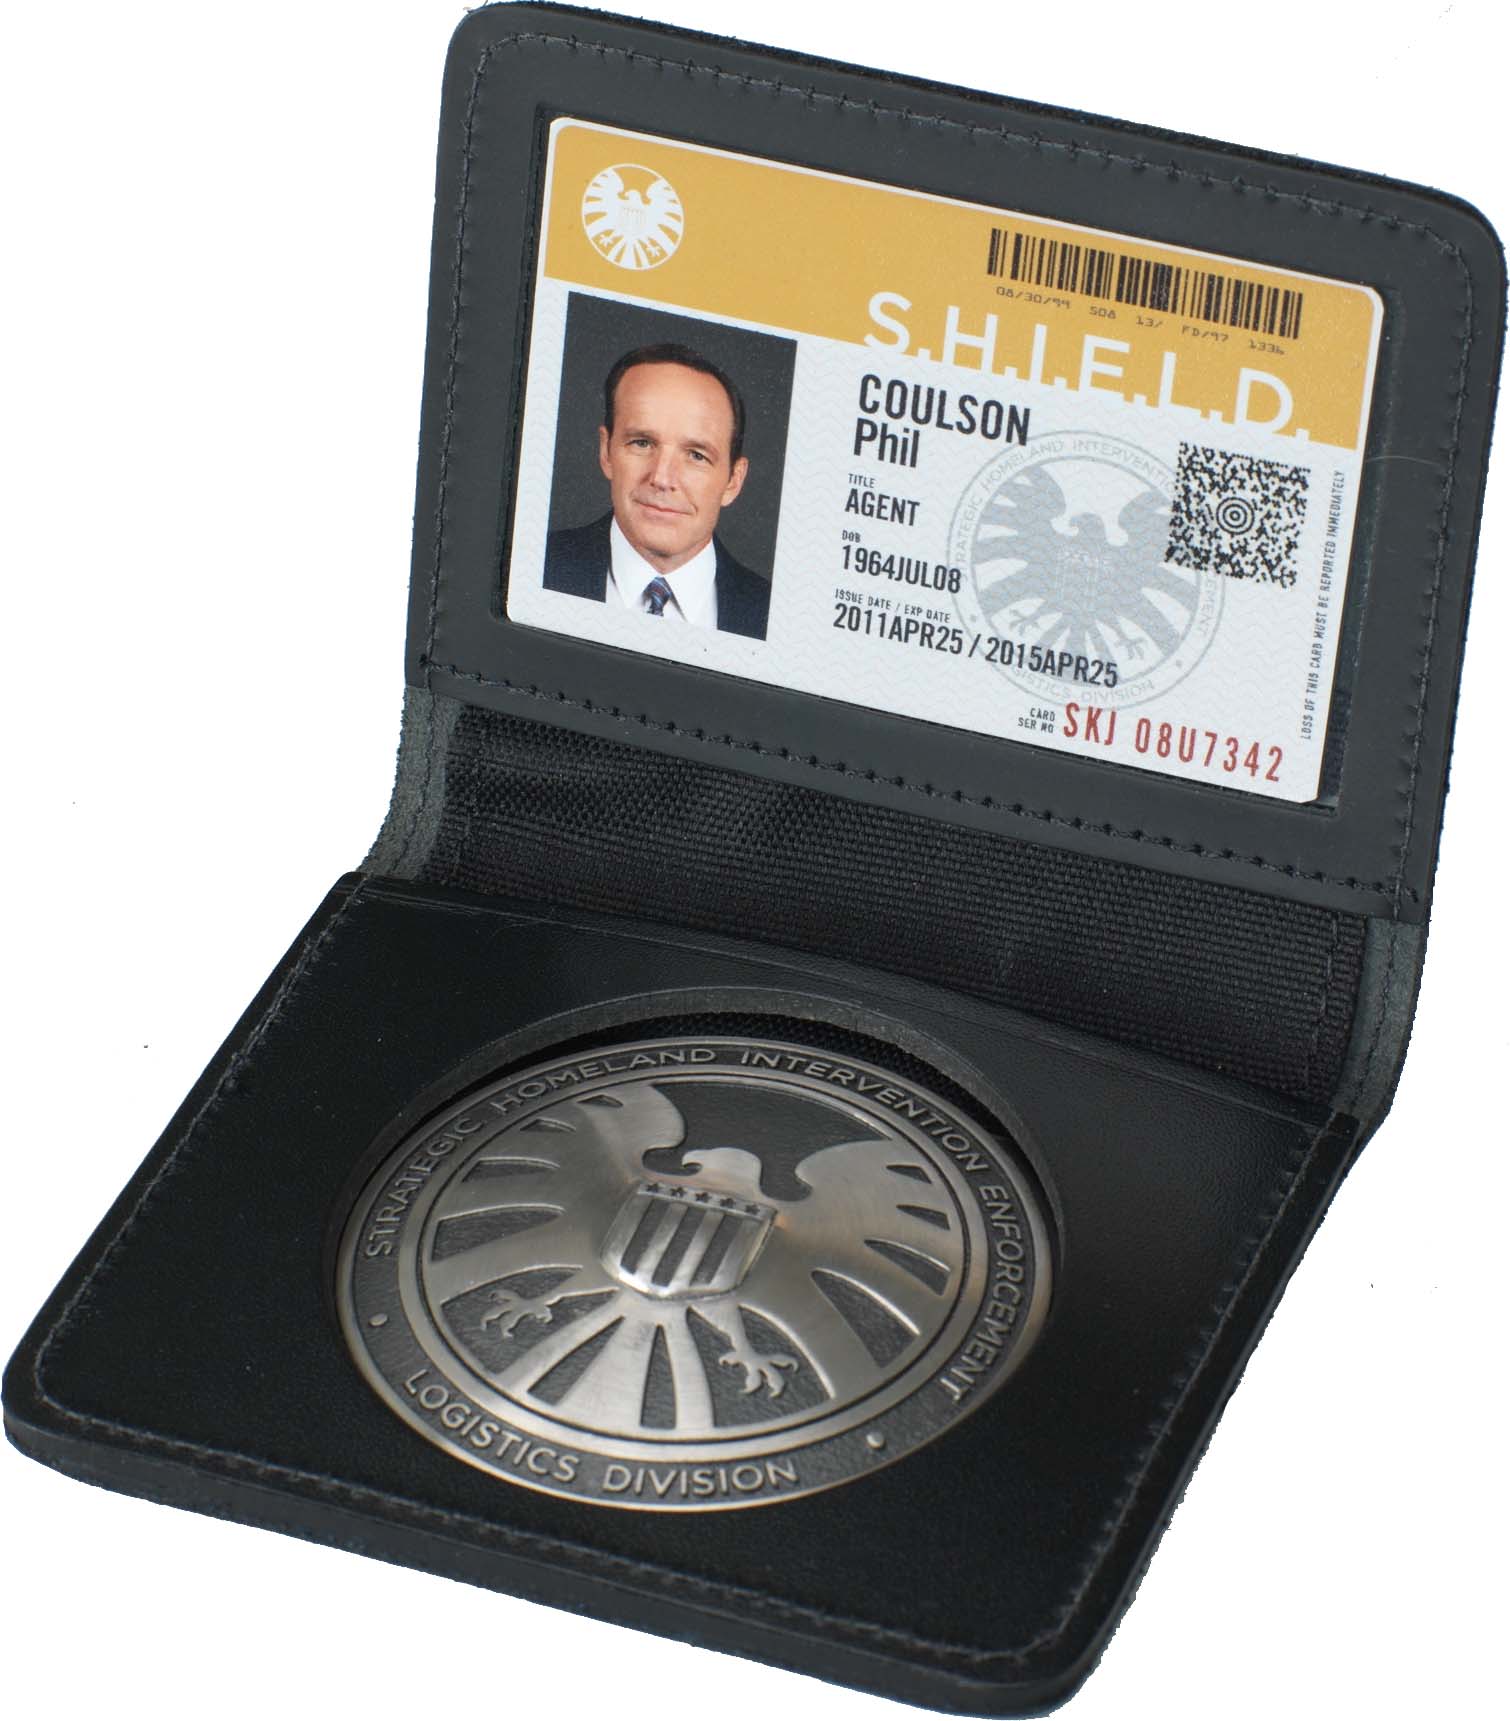 A1 ~ PHIL COULSON ~ ID CARD W/CLIP ON ~ NEW LOOKS GREAT Agents of S.H.I.E.L.D 